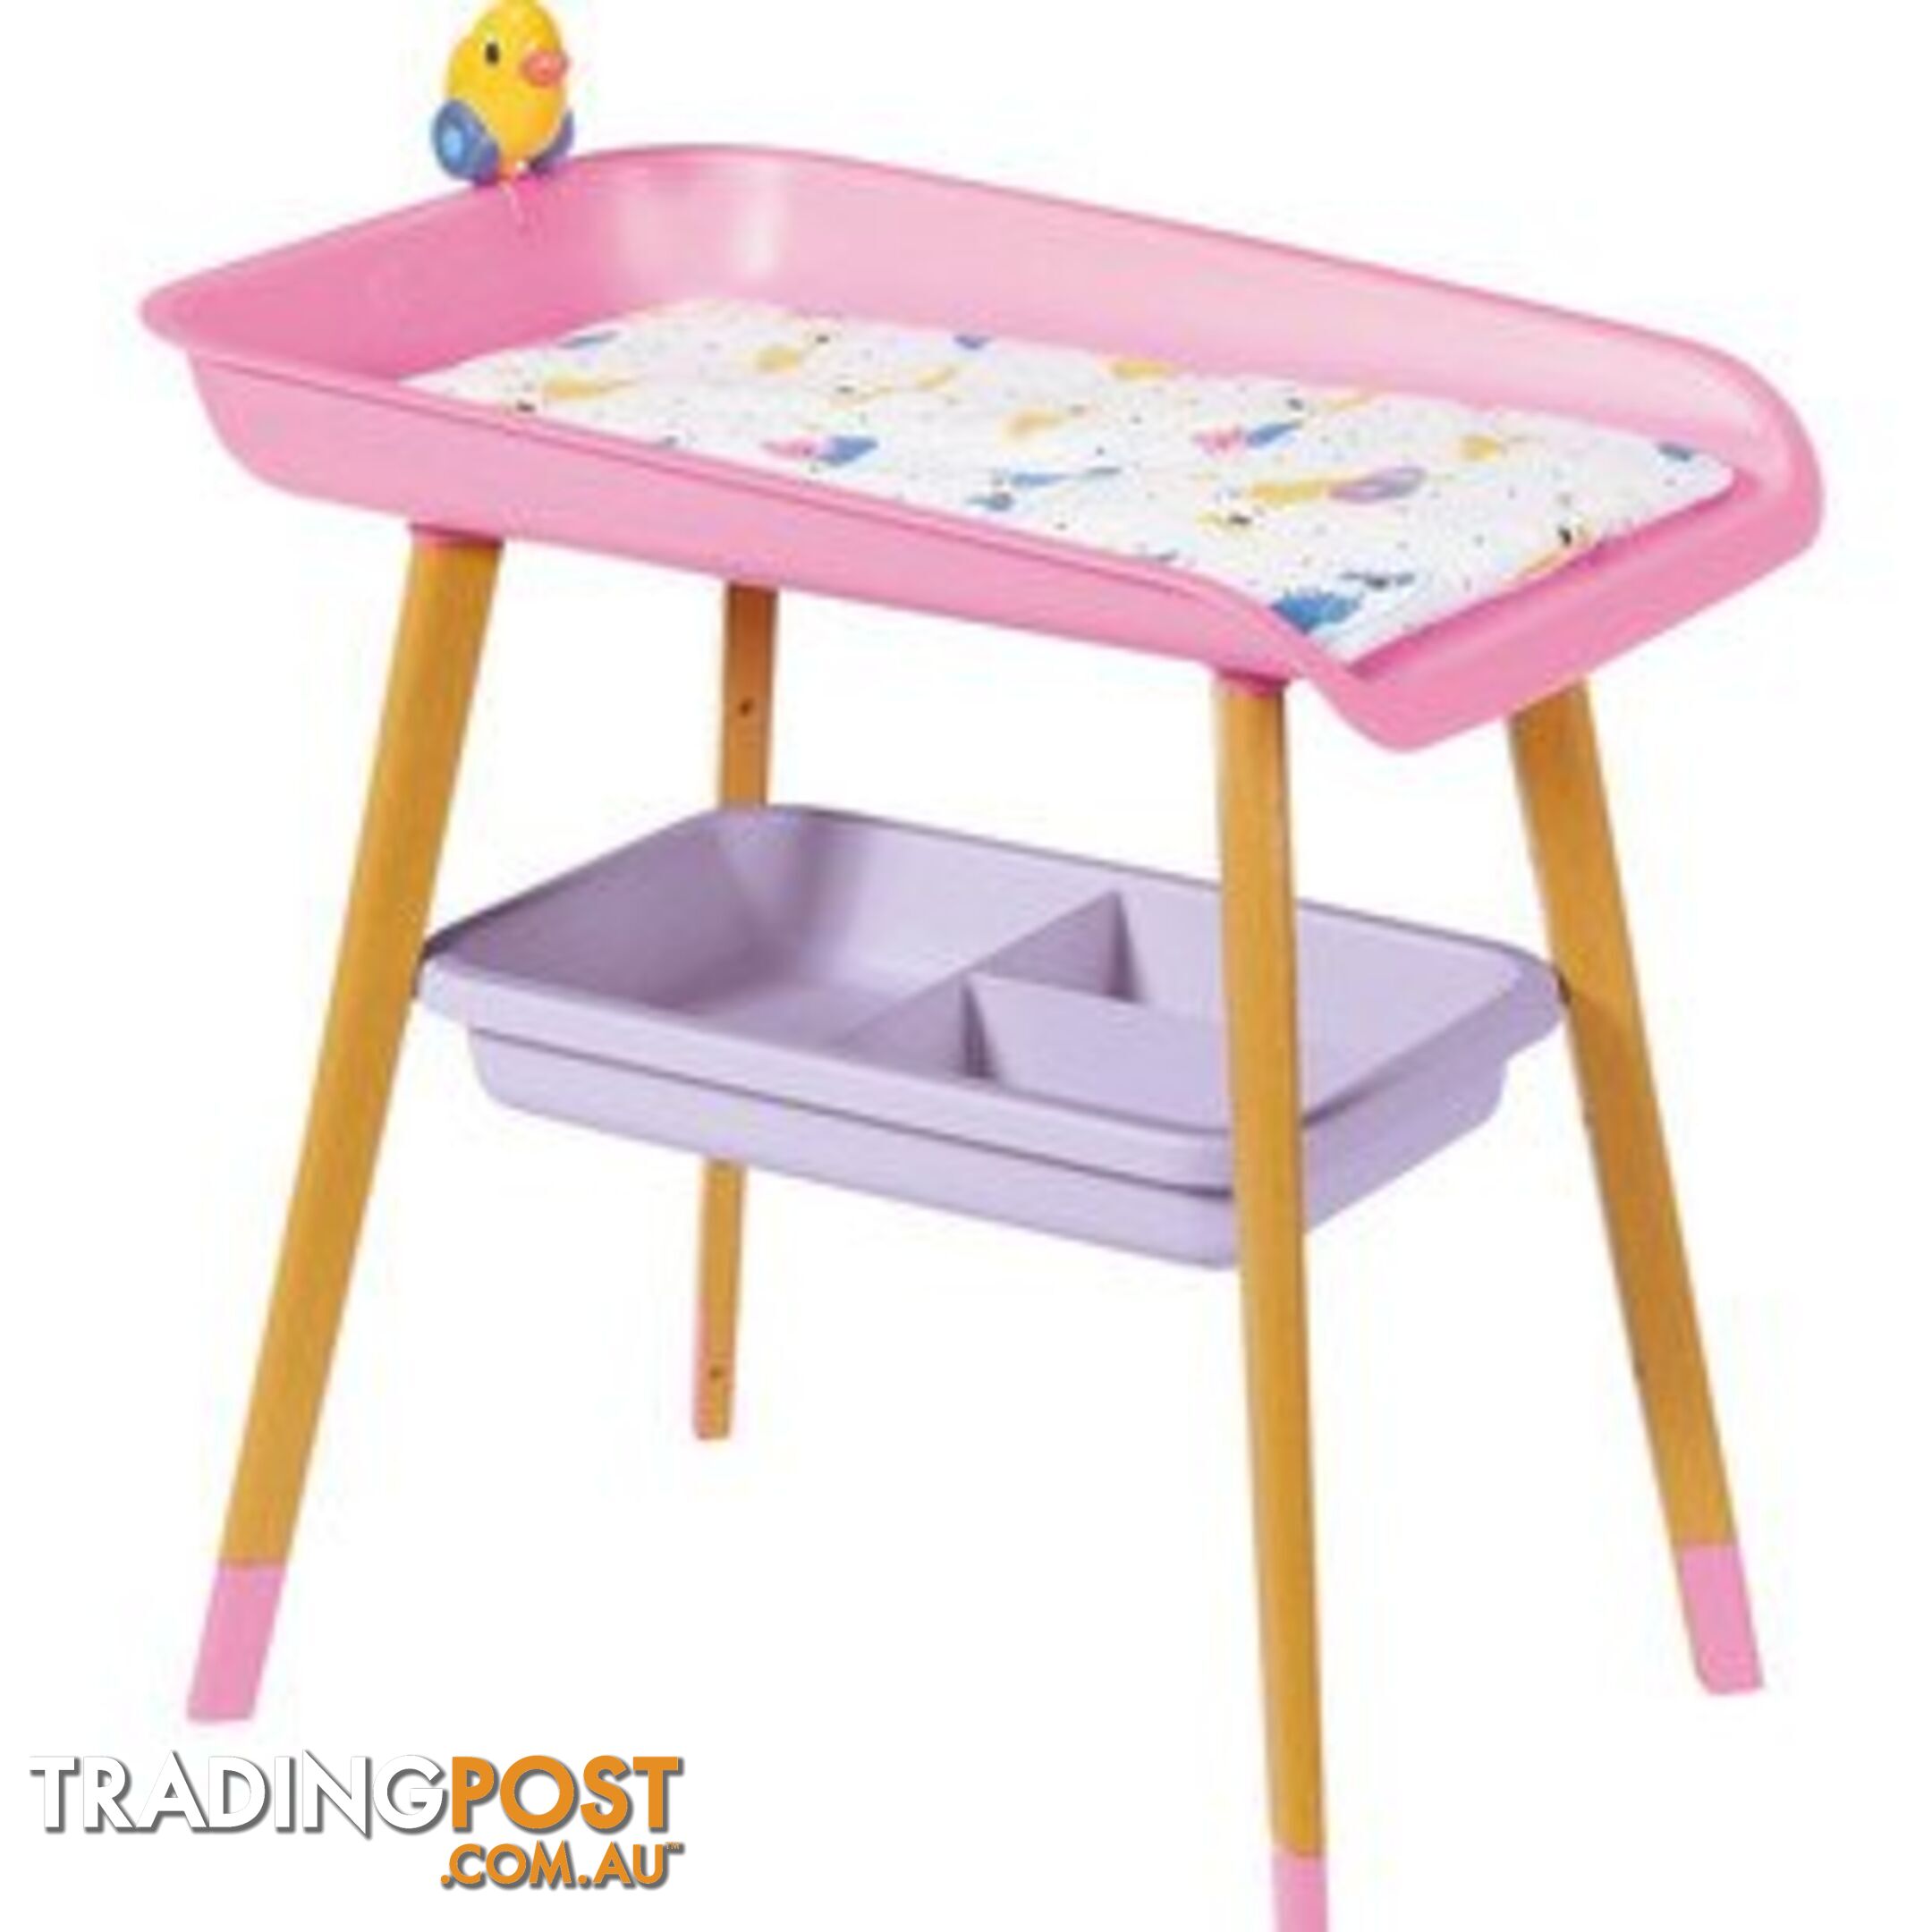 Baby Born - Changing Table Bj829998 - 4001167829998